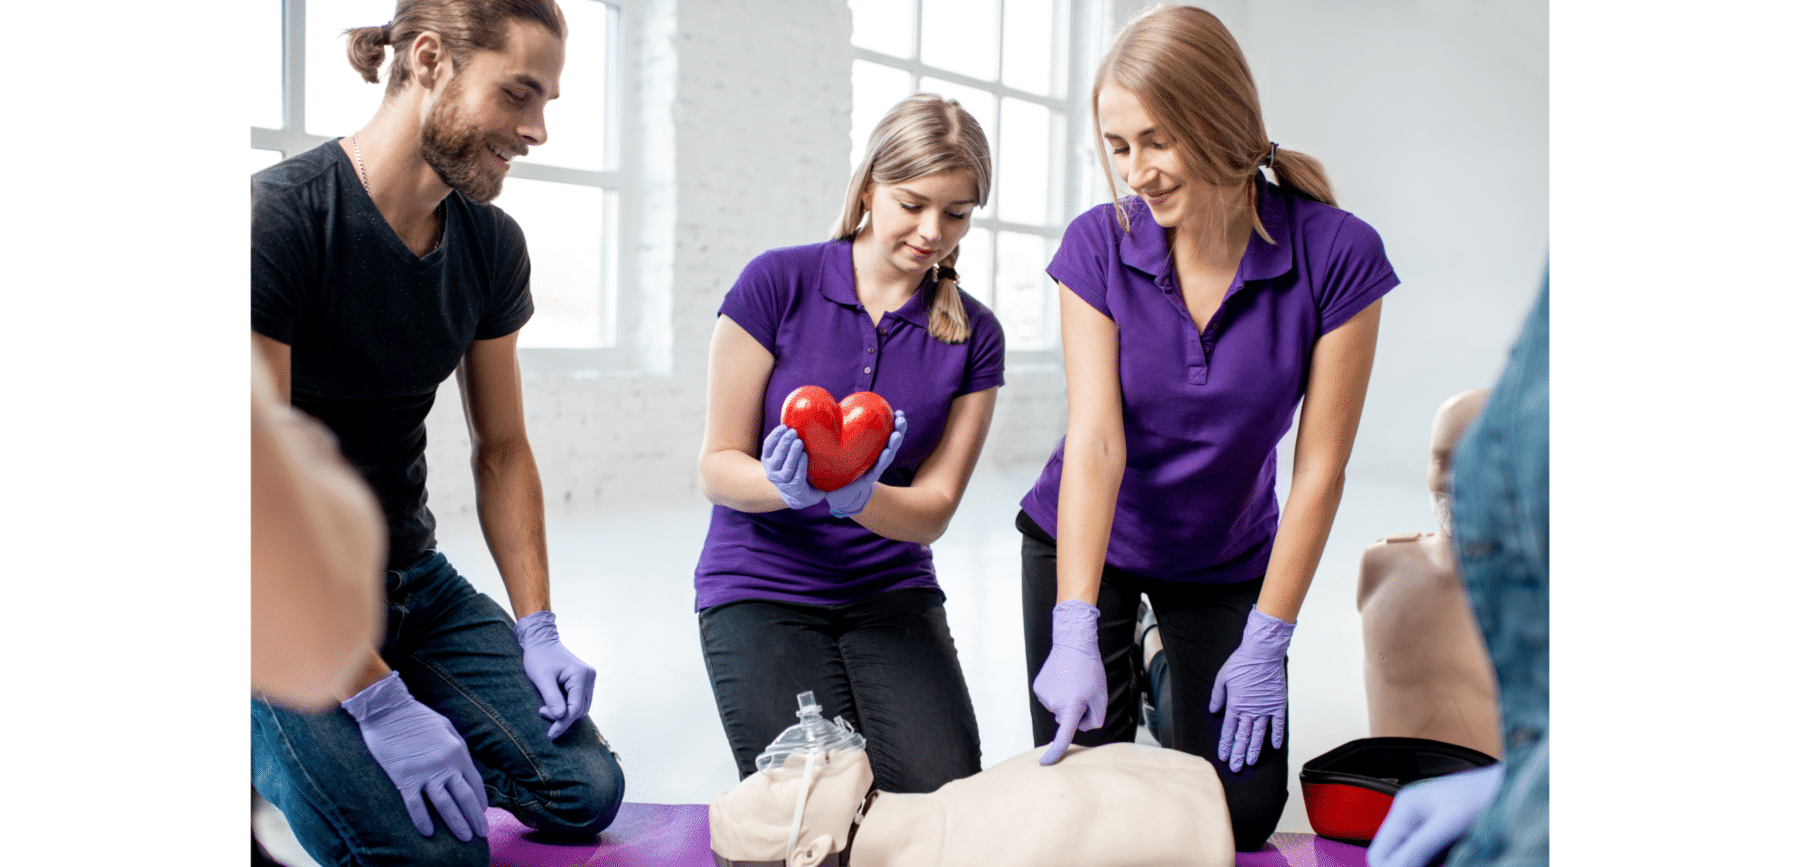 Group CPR AED And First Aid Classes